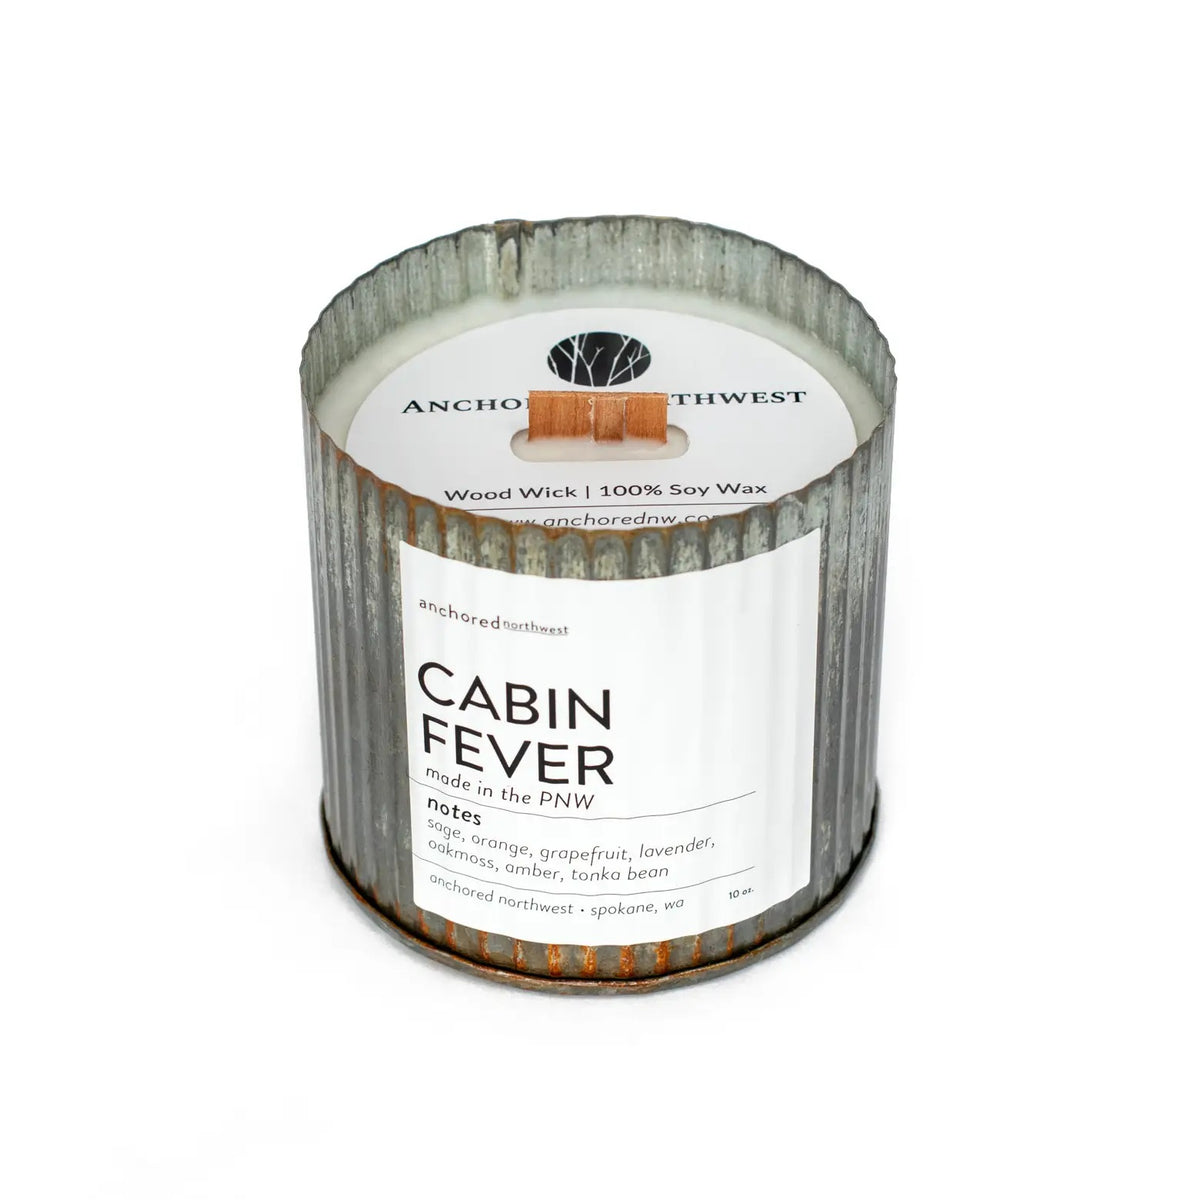 Wood Wick Candle - Cabin Fever